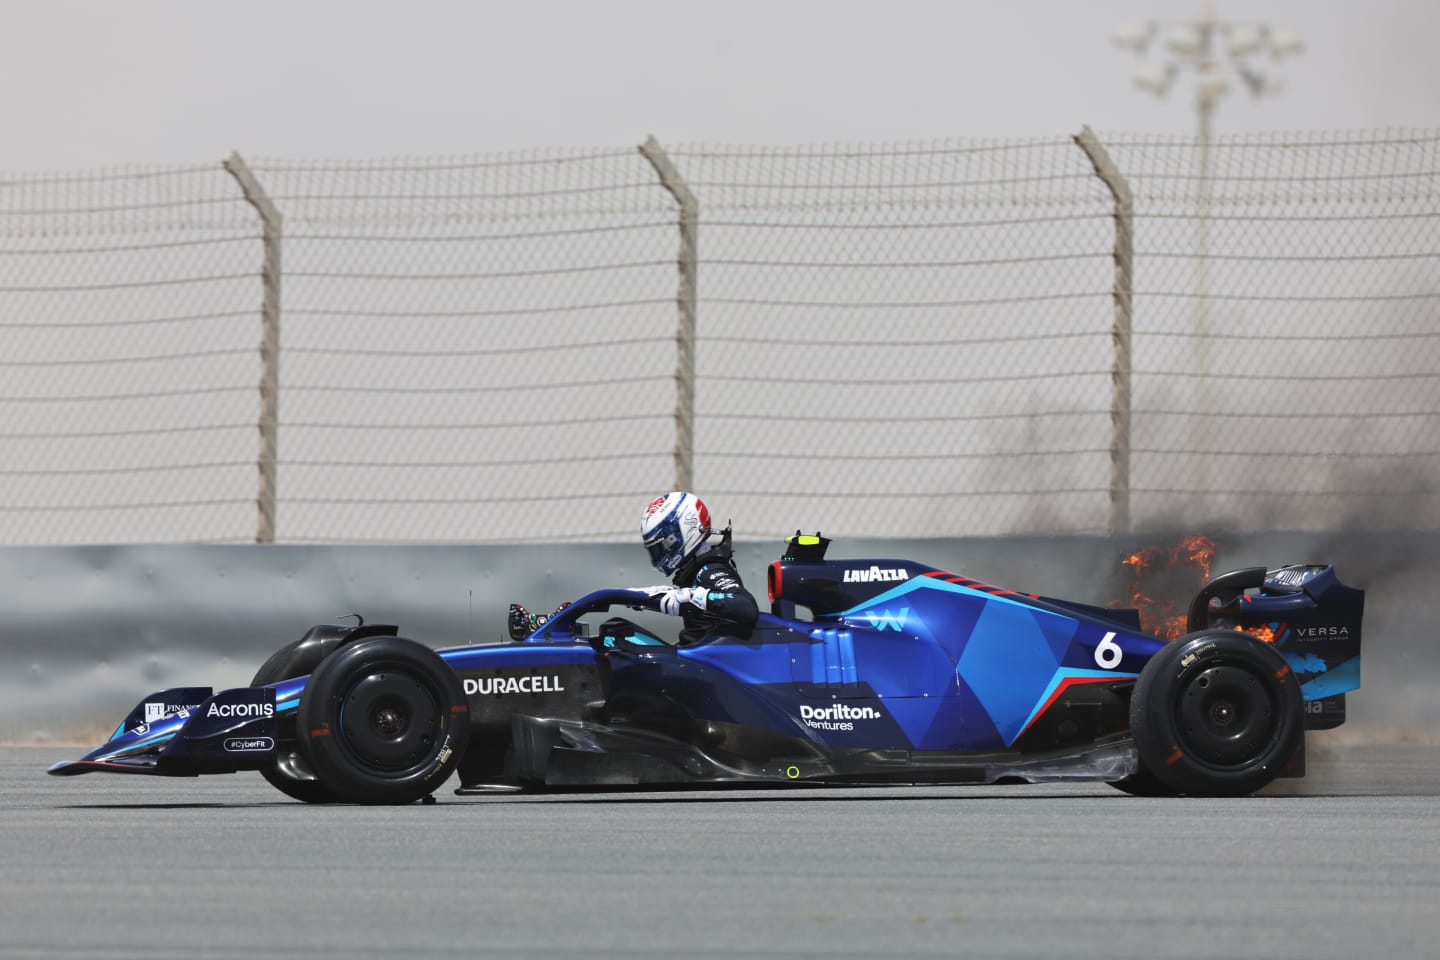 BAHRAIN, BAHRAIN - MARCH 11: Nicholas Latifi of Canada and Williams climbs from his car as his rear brakes catch fire during Day Two of F1 Testing at Bahrain International Circuit on March 11, 2022 in Bahrain, Bahrain. (Photo by Mark Thompson/Getty Images)